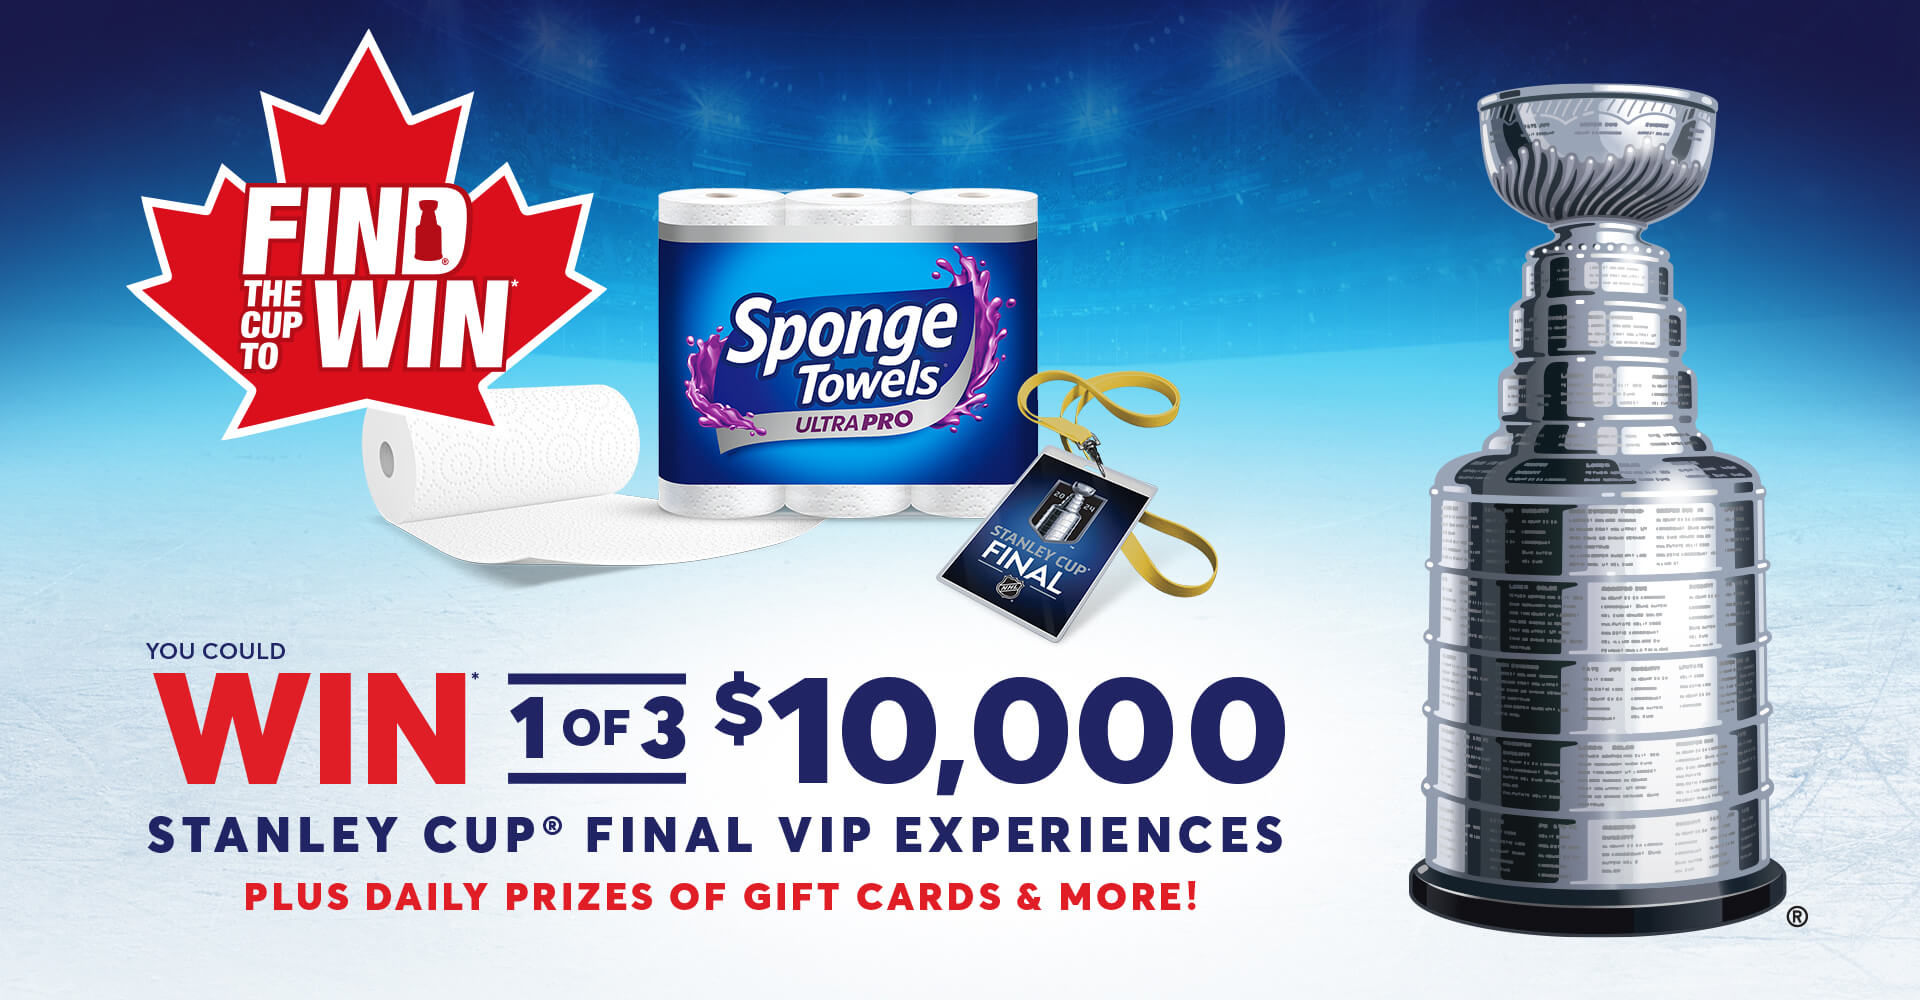 You could win 1 of 3 $10,000 Stanley Cup Final VIP Experiences Plus Daily Prizes of Gift Cards and More!